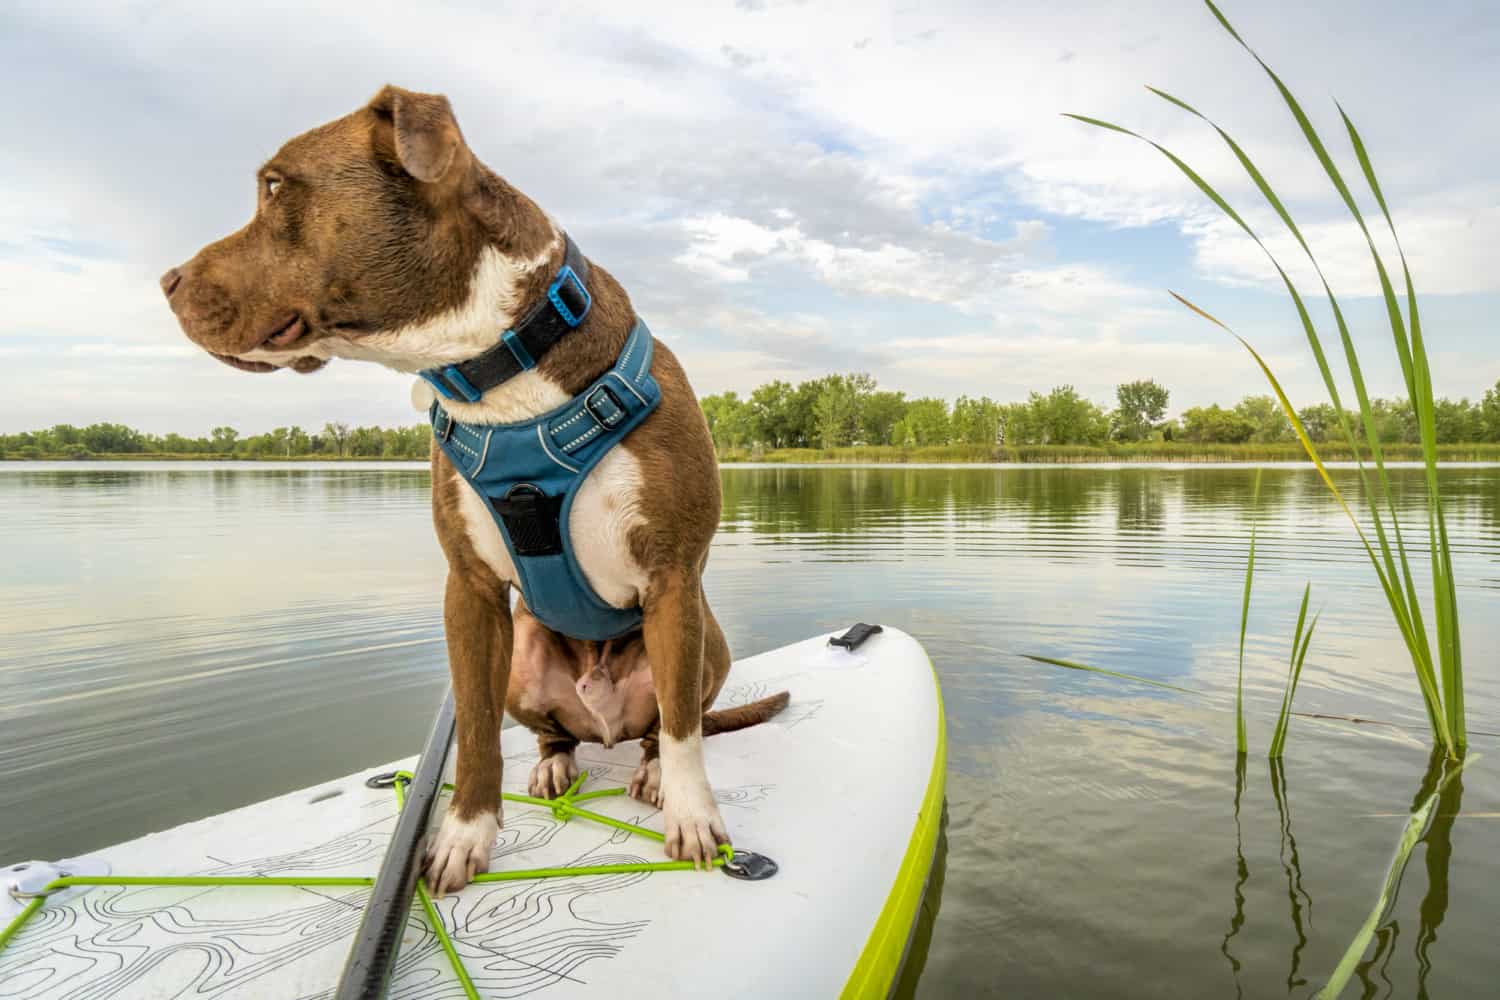 Pitbull travels on a paddle board